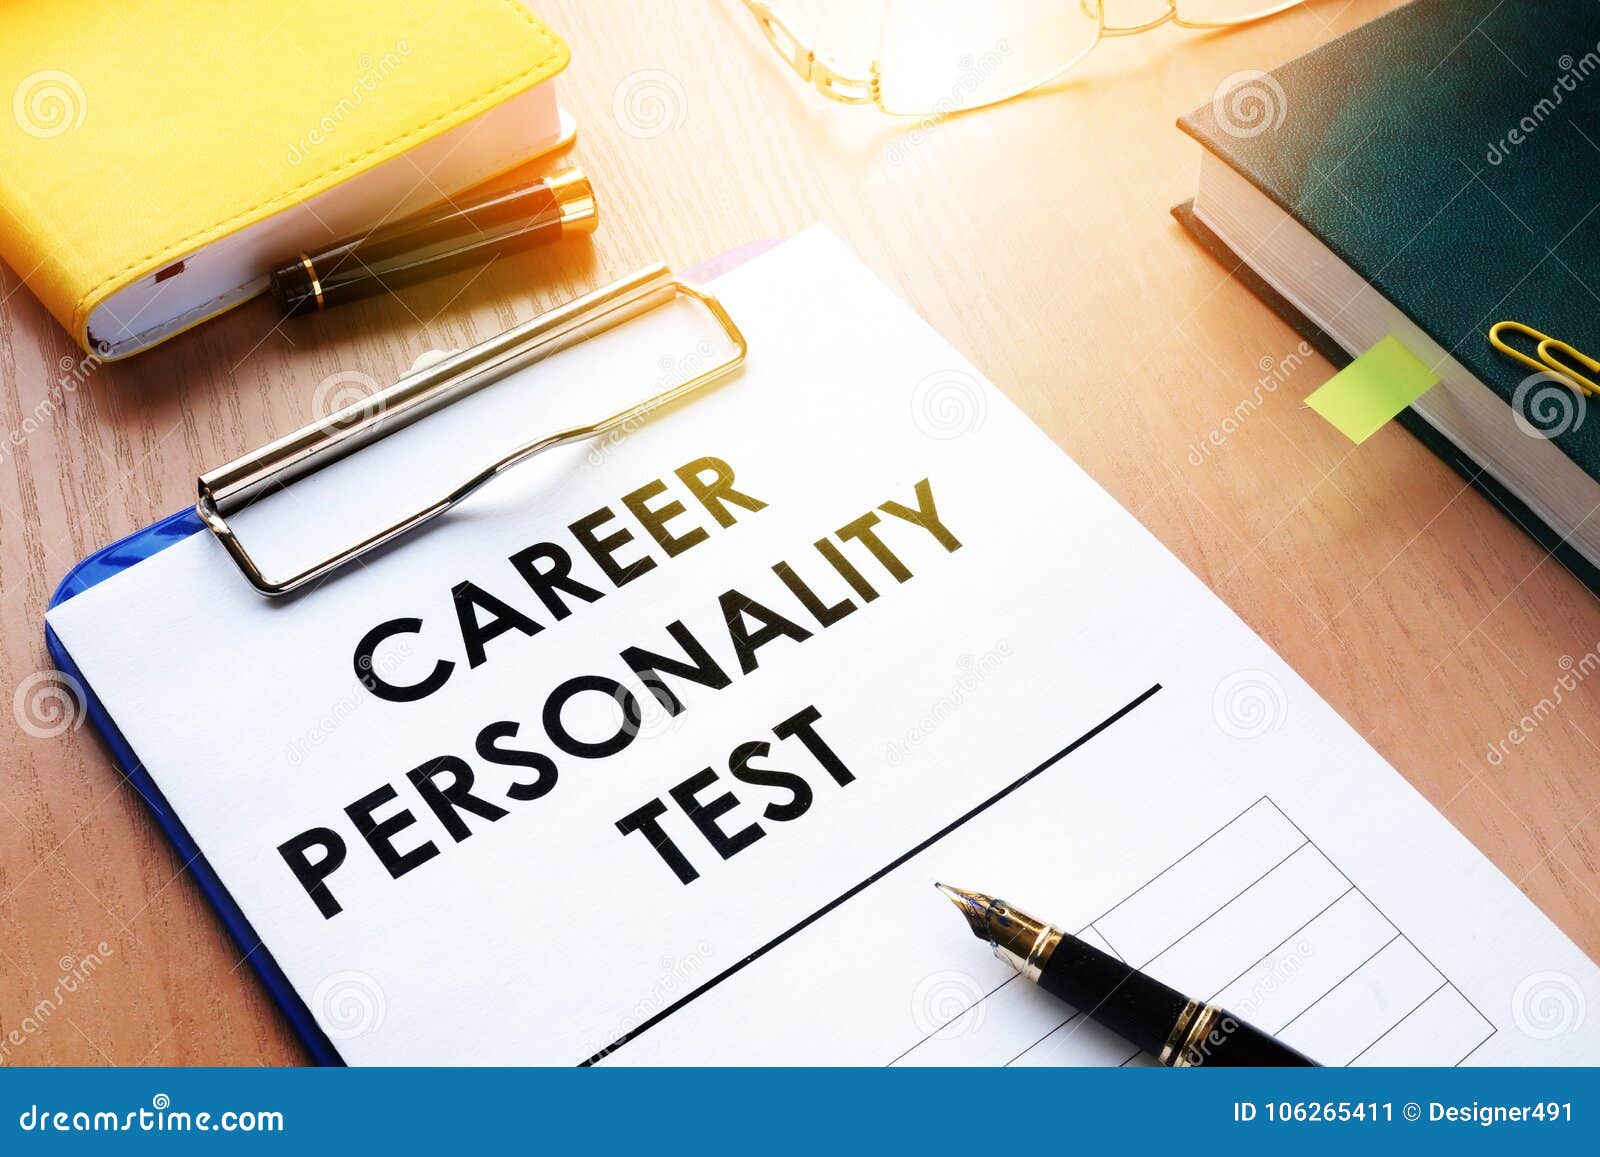 Test the office personality 24 Free